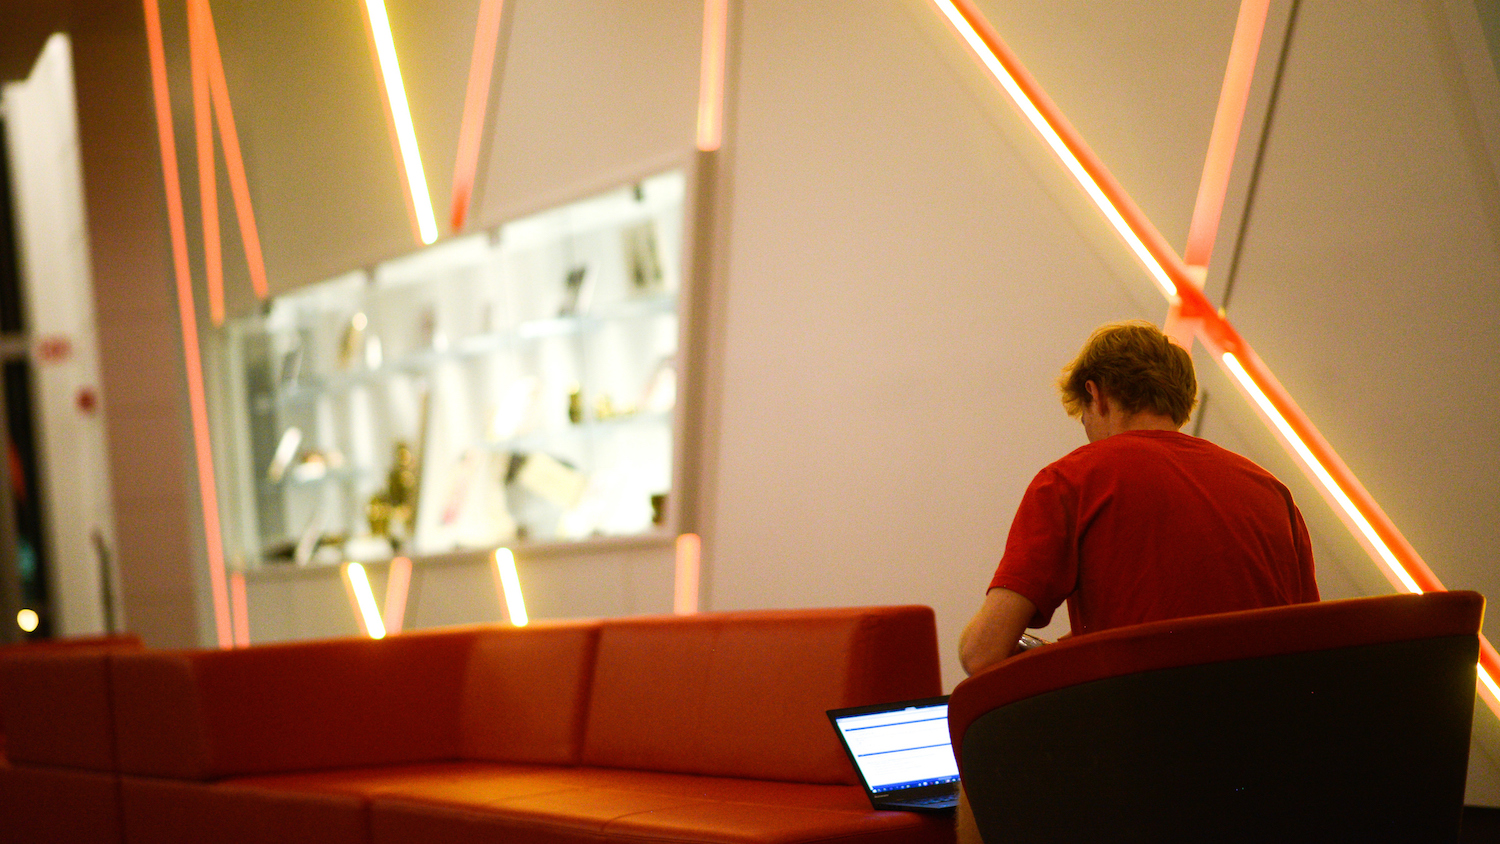 Students use the Talley Student Union. Photo by Marc Hall